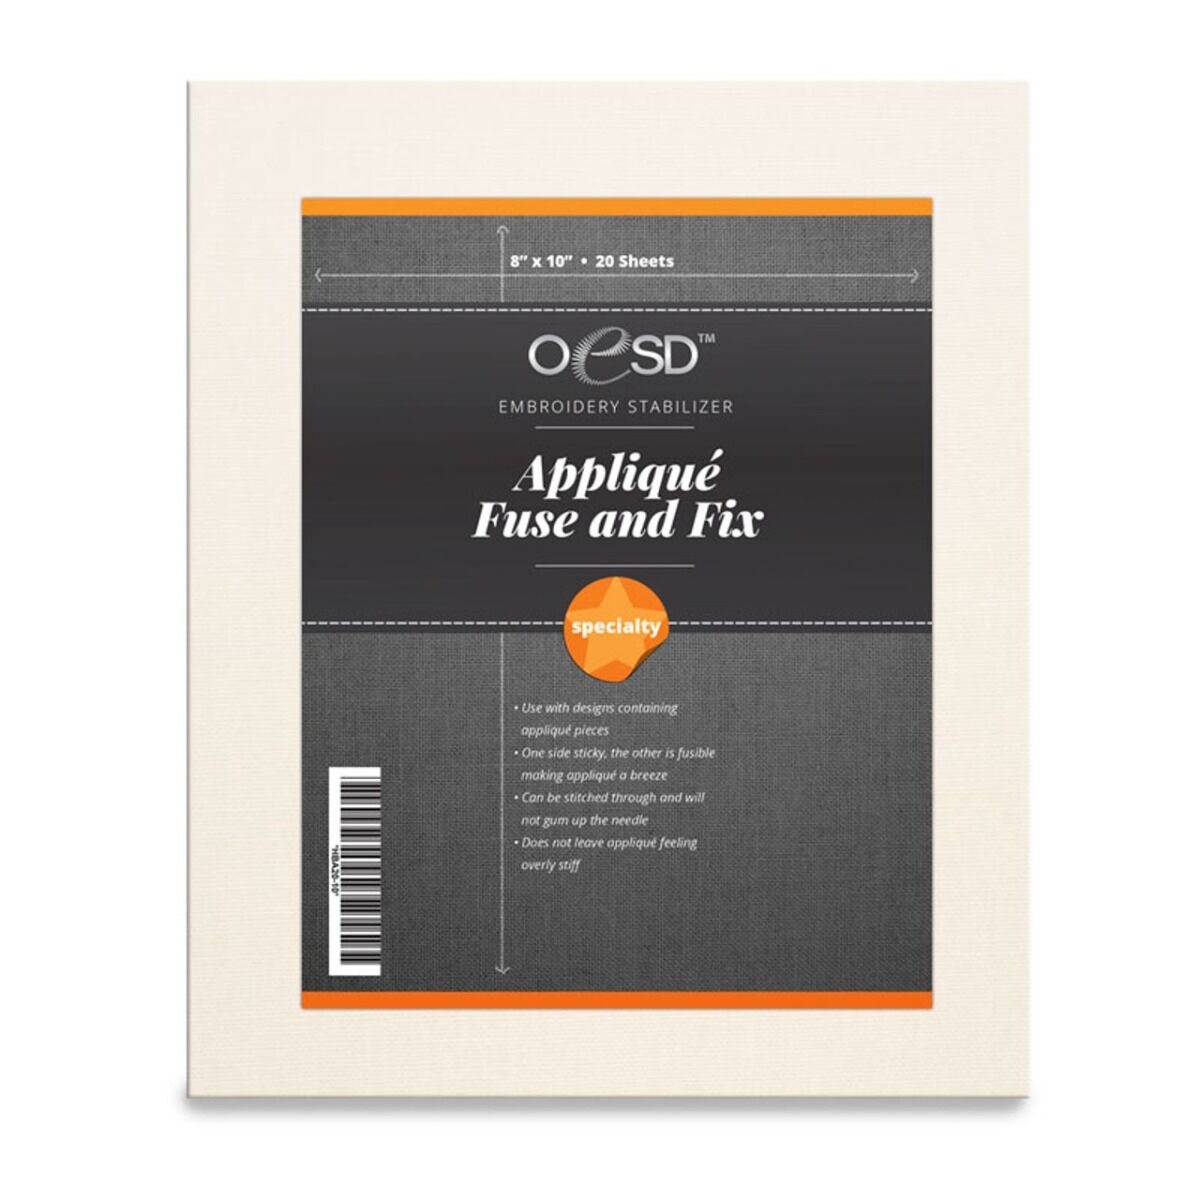 OESD Applique Fuse and Fix Stabilizer Sheets - 20 Pack
